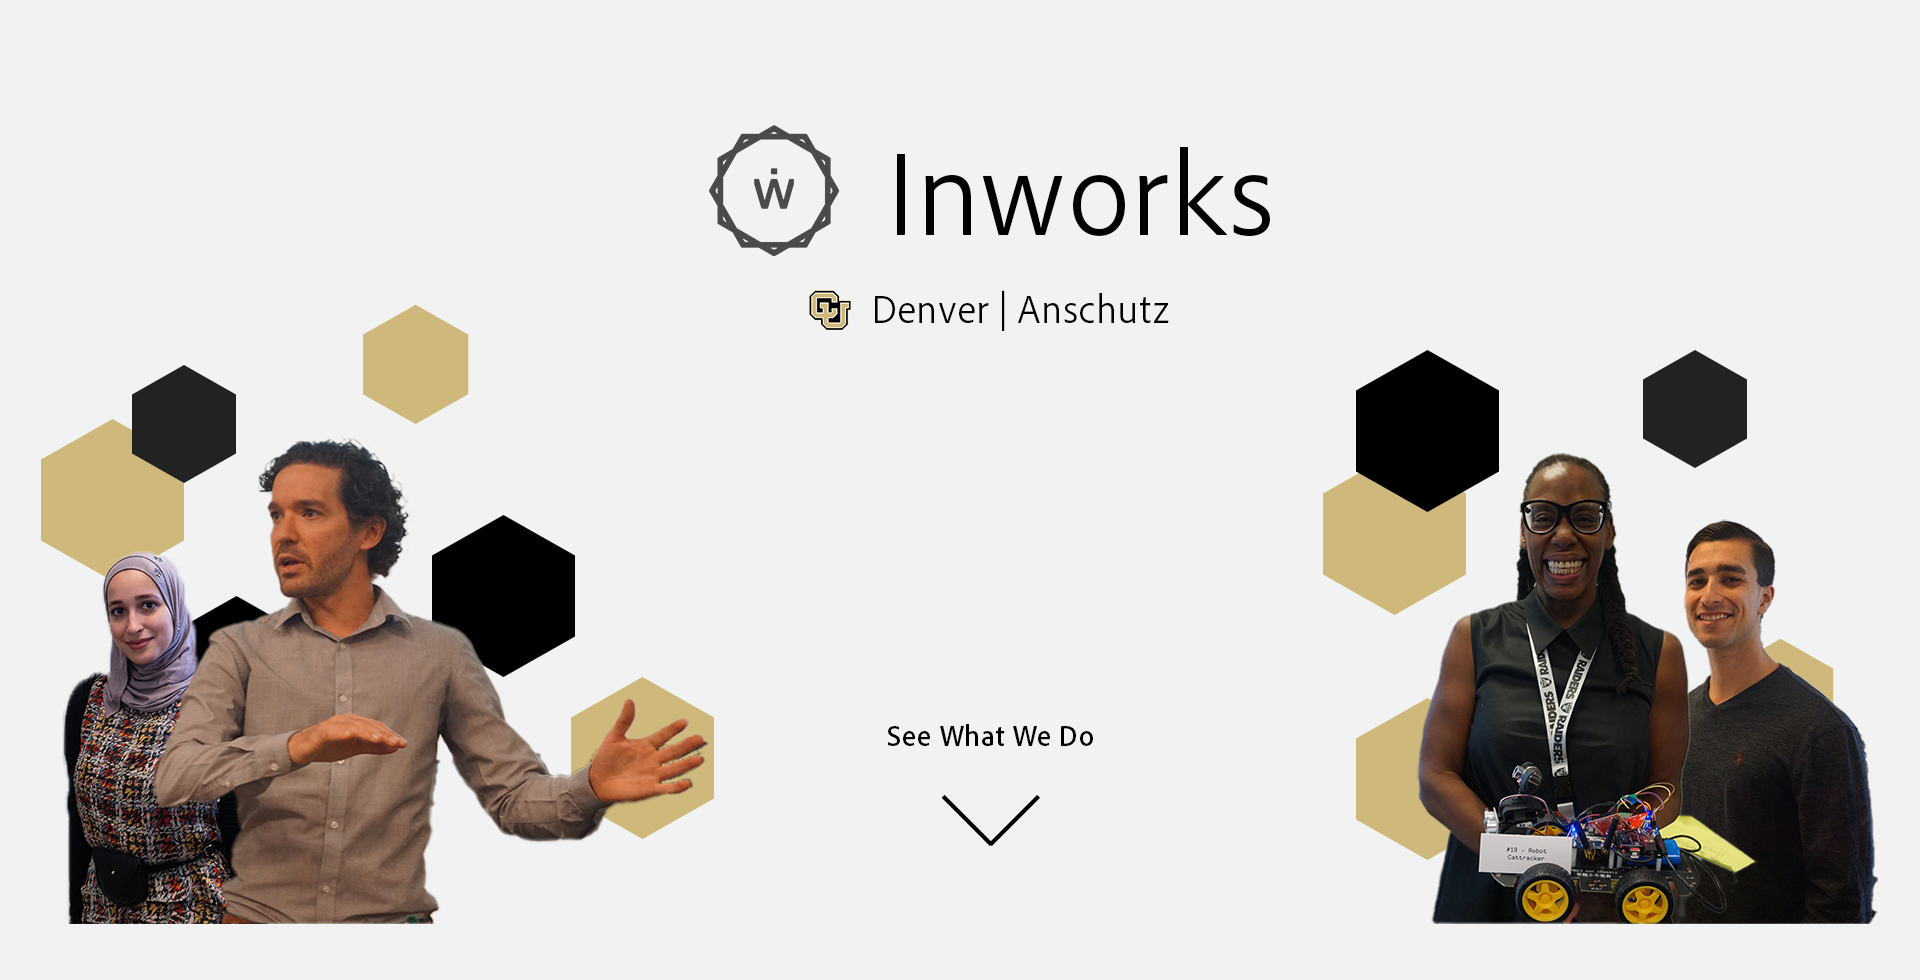 A group of diverse people learning at Inworks